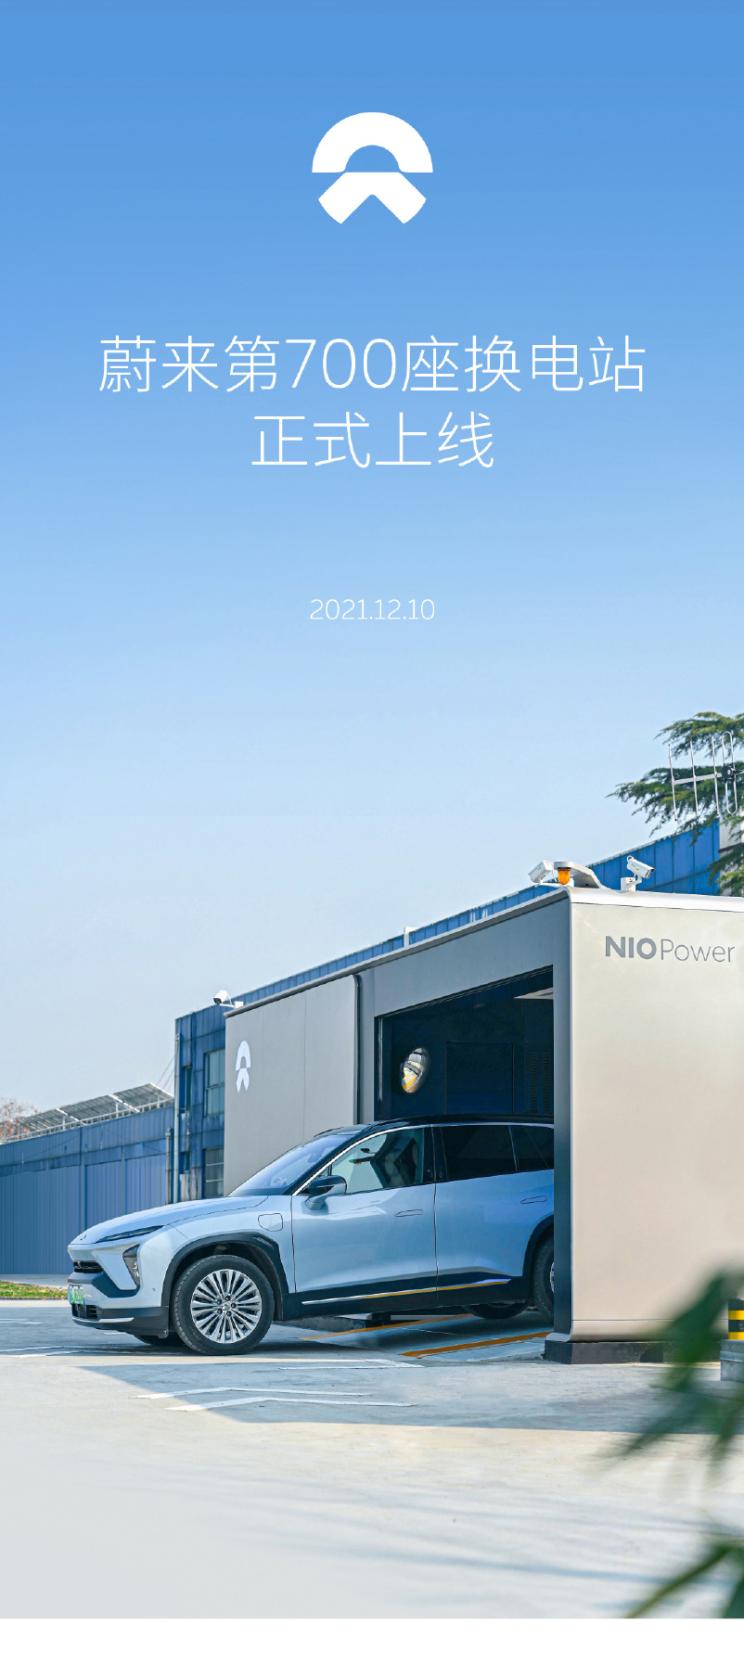 Achieve the annual target, the number of NIO power swapping stations reaches 700